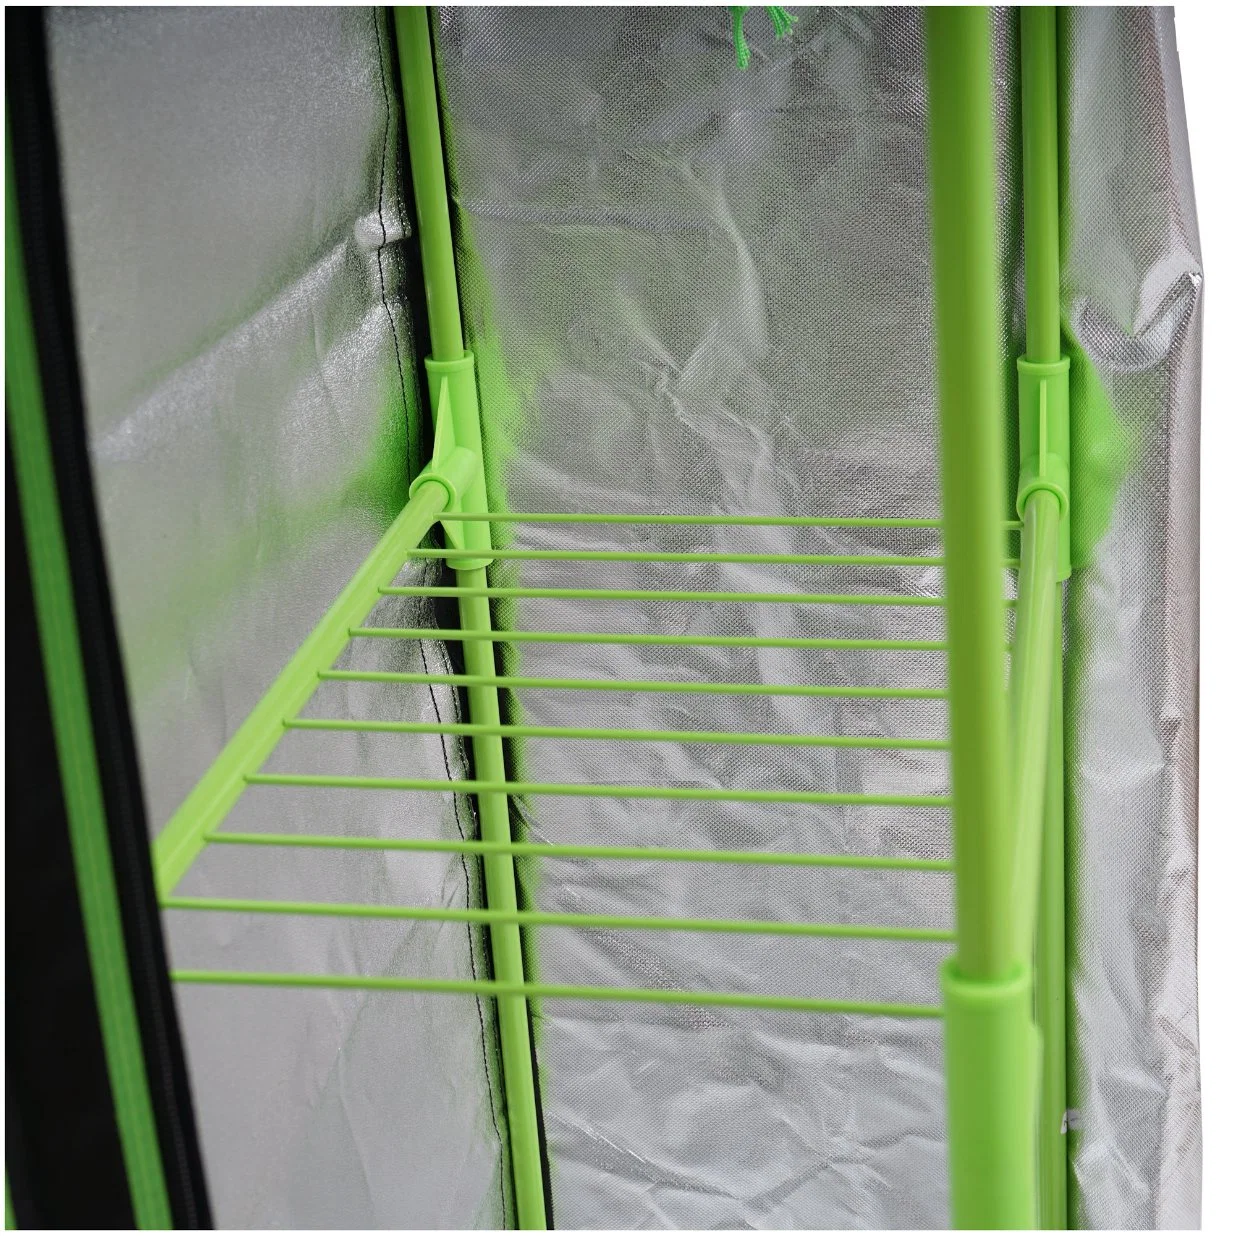 2 in 1 Multi-Chamber Peflective Grow Tent for Indoor Hydroponic Growing System